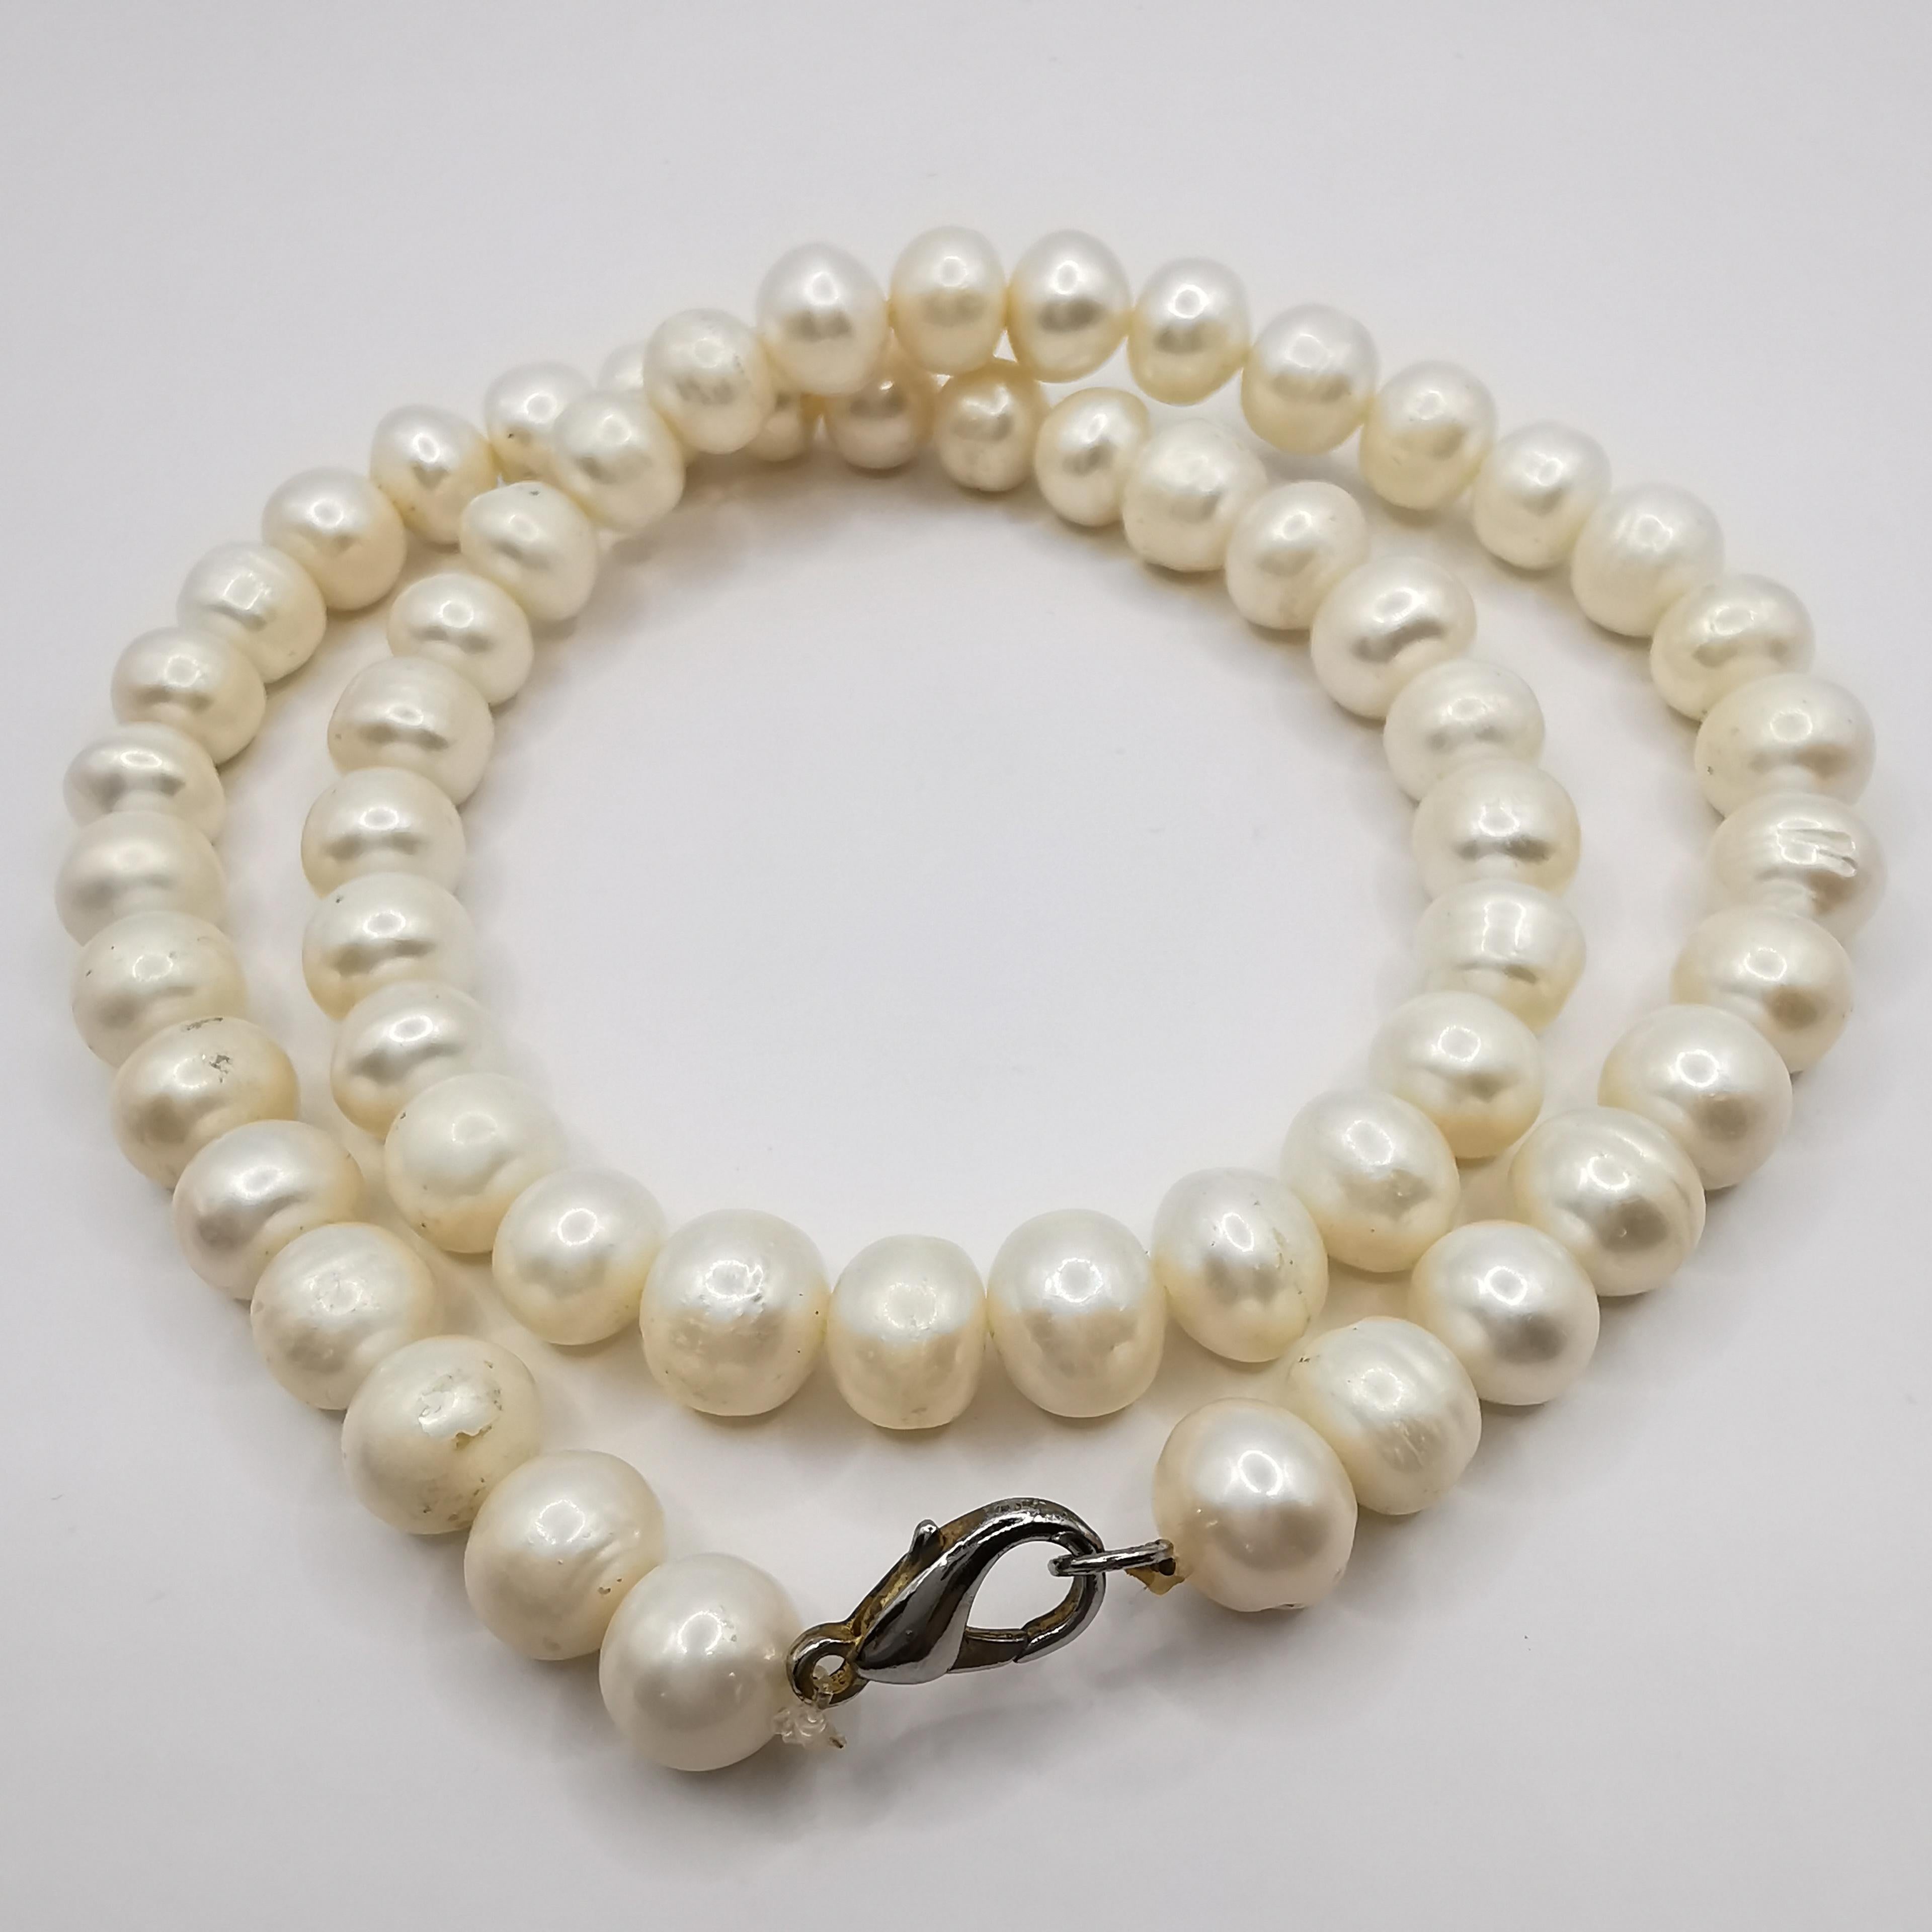 This elegant 18-inch necklace features a strand of 58 freshwater cultured pearls (8.5-10mm), comfortably secured with a lobster clasp. A perfect accessory for every occasion.

8.5-10mm Cultured Freshwater Pearls
Quantity: 58 pearls
Chain Length: 18